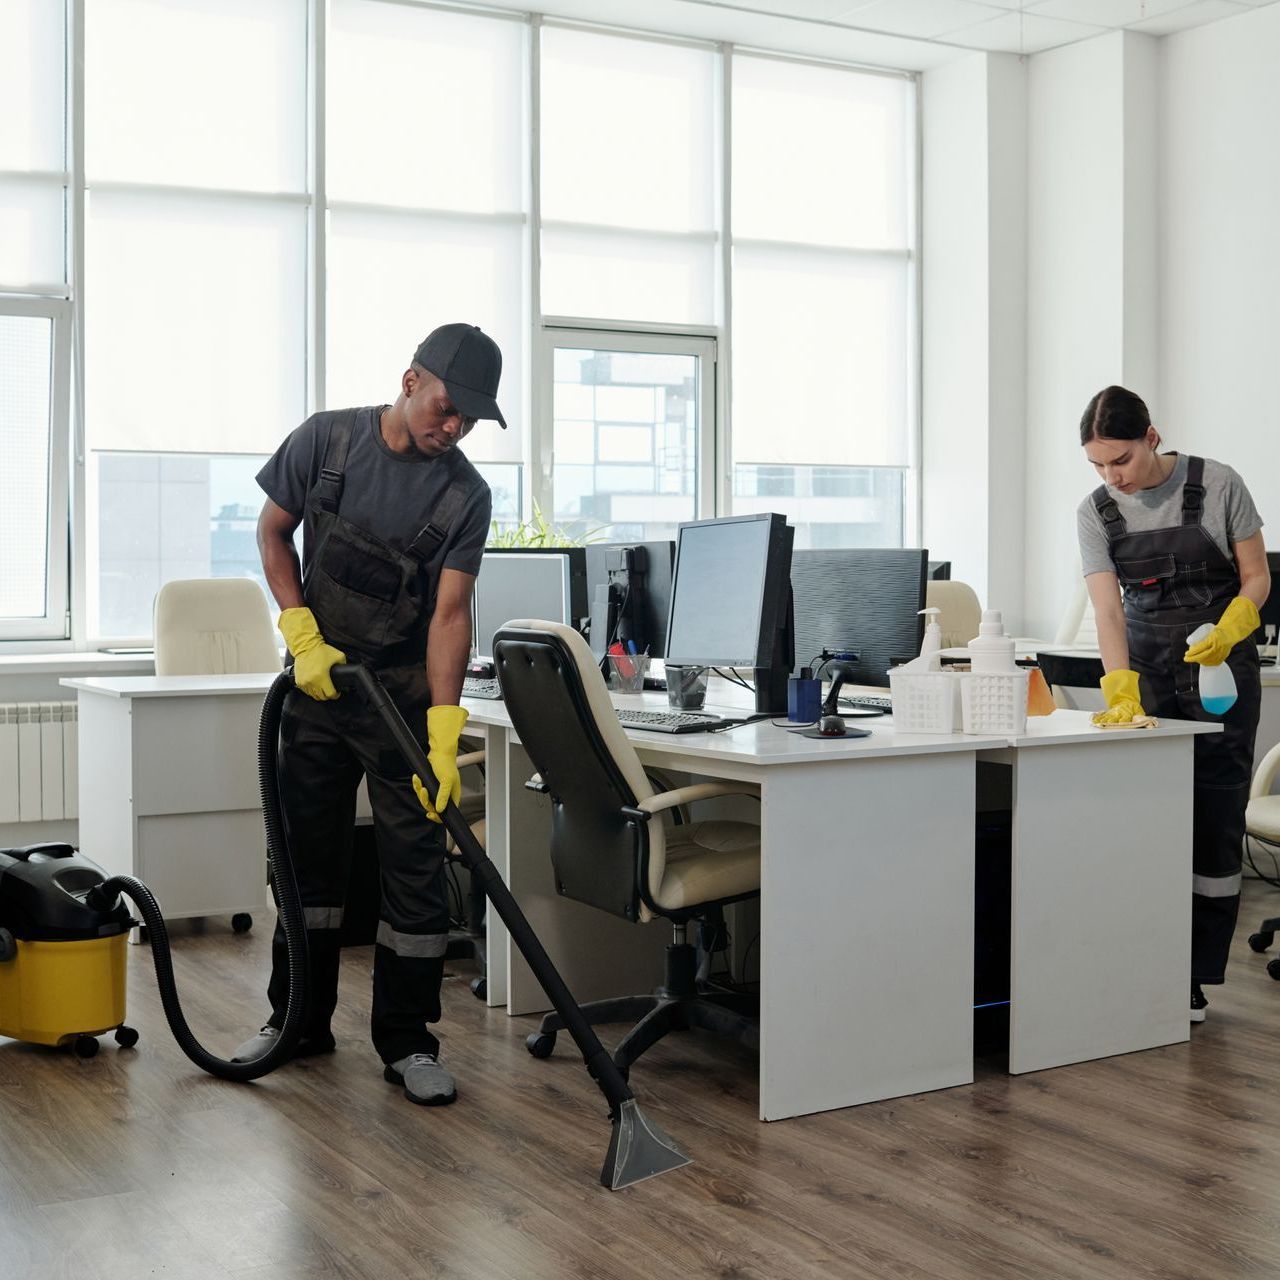 A man and a woman are cleaning an office with a vacuum cleaner.